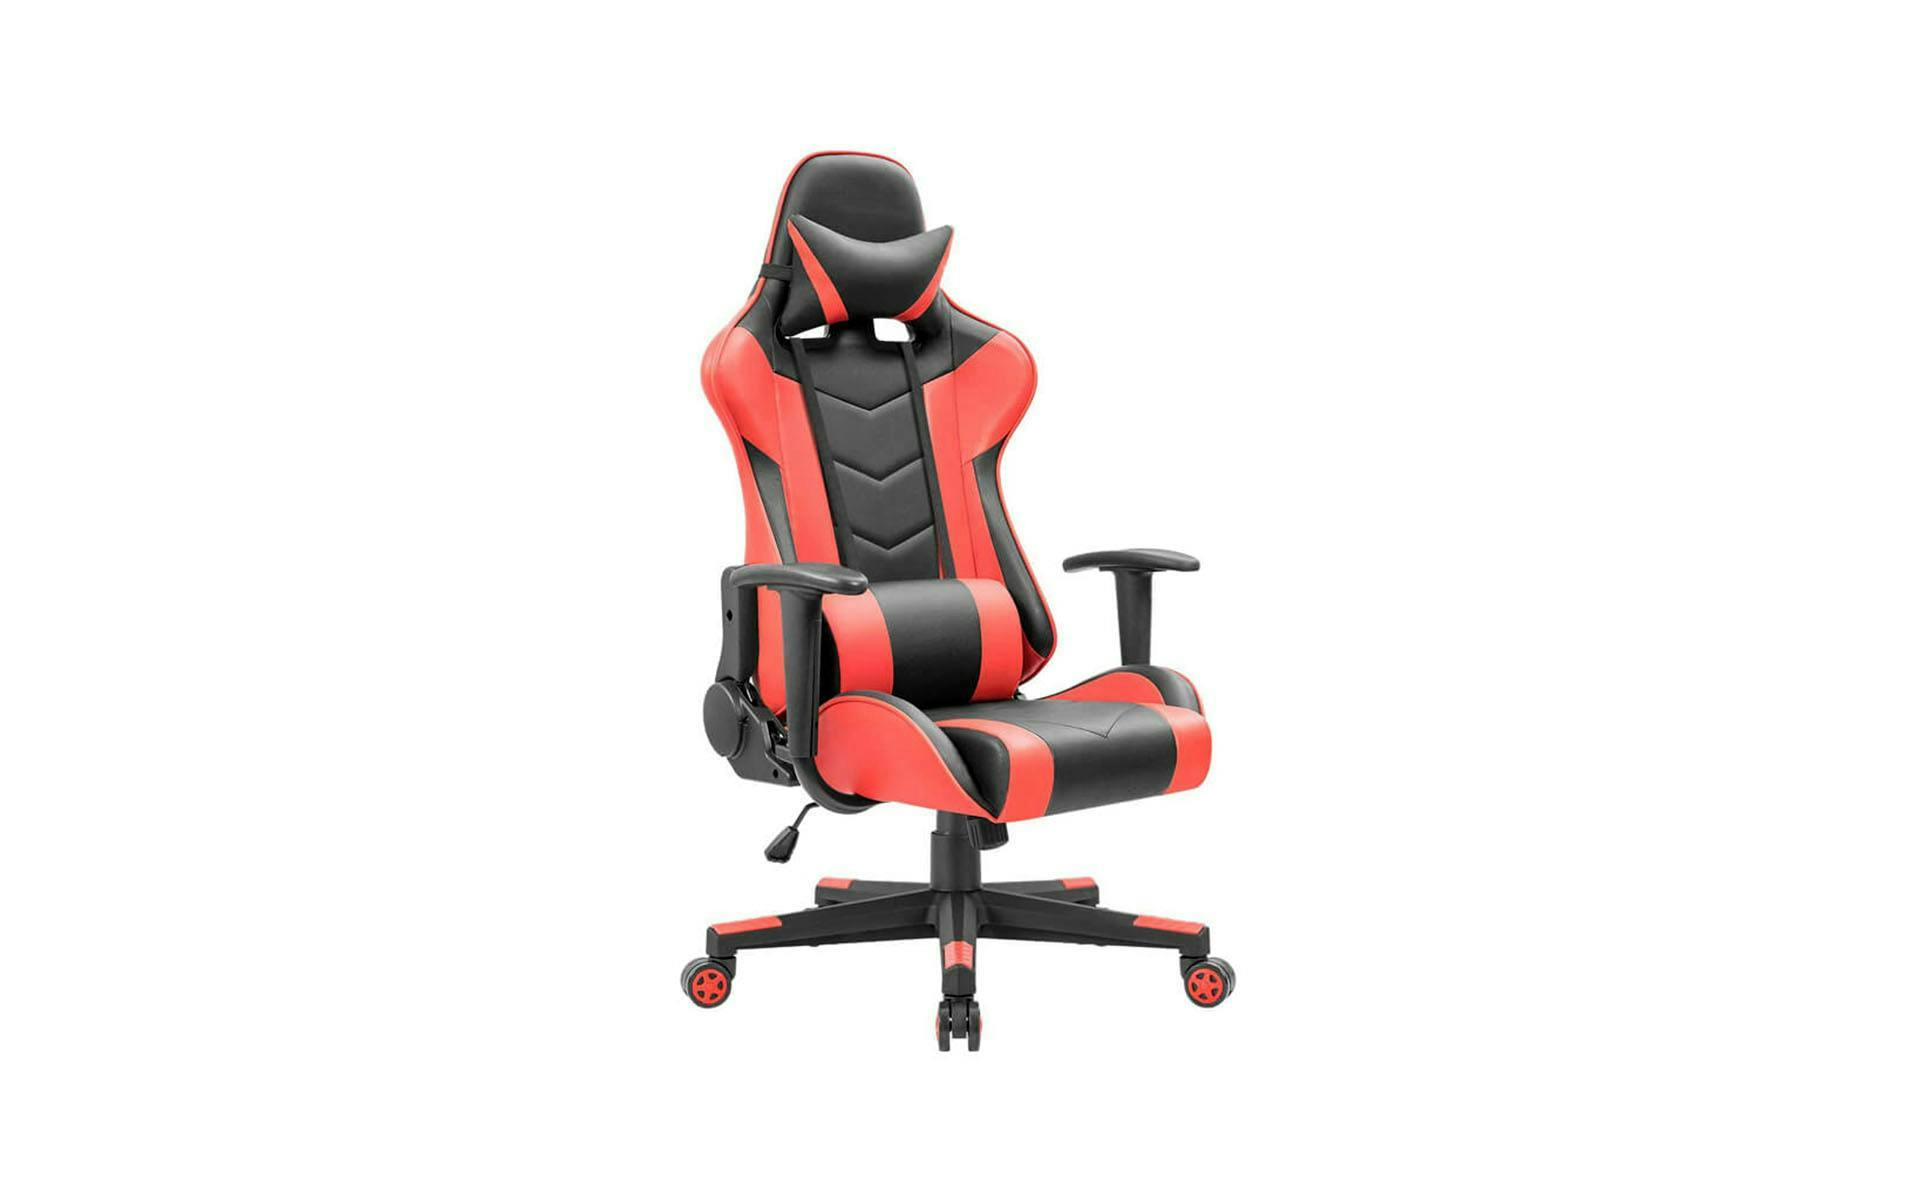 Black and red gaming chair in a classic "Racing" shape